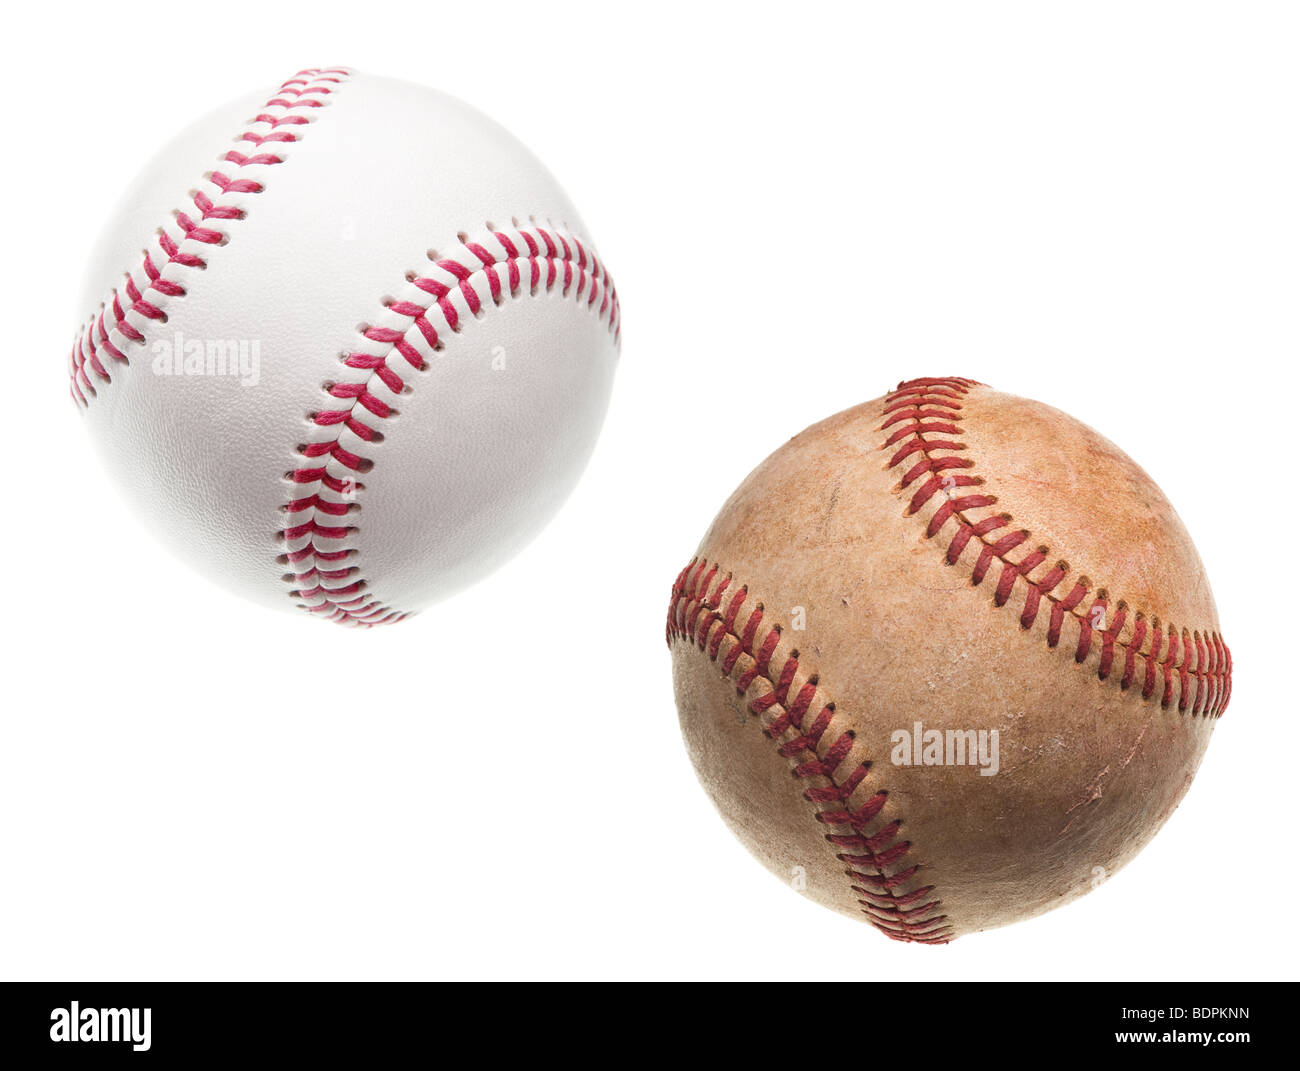 old and new baseballs with red stitching isolated on white background Stock Photo